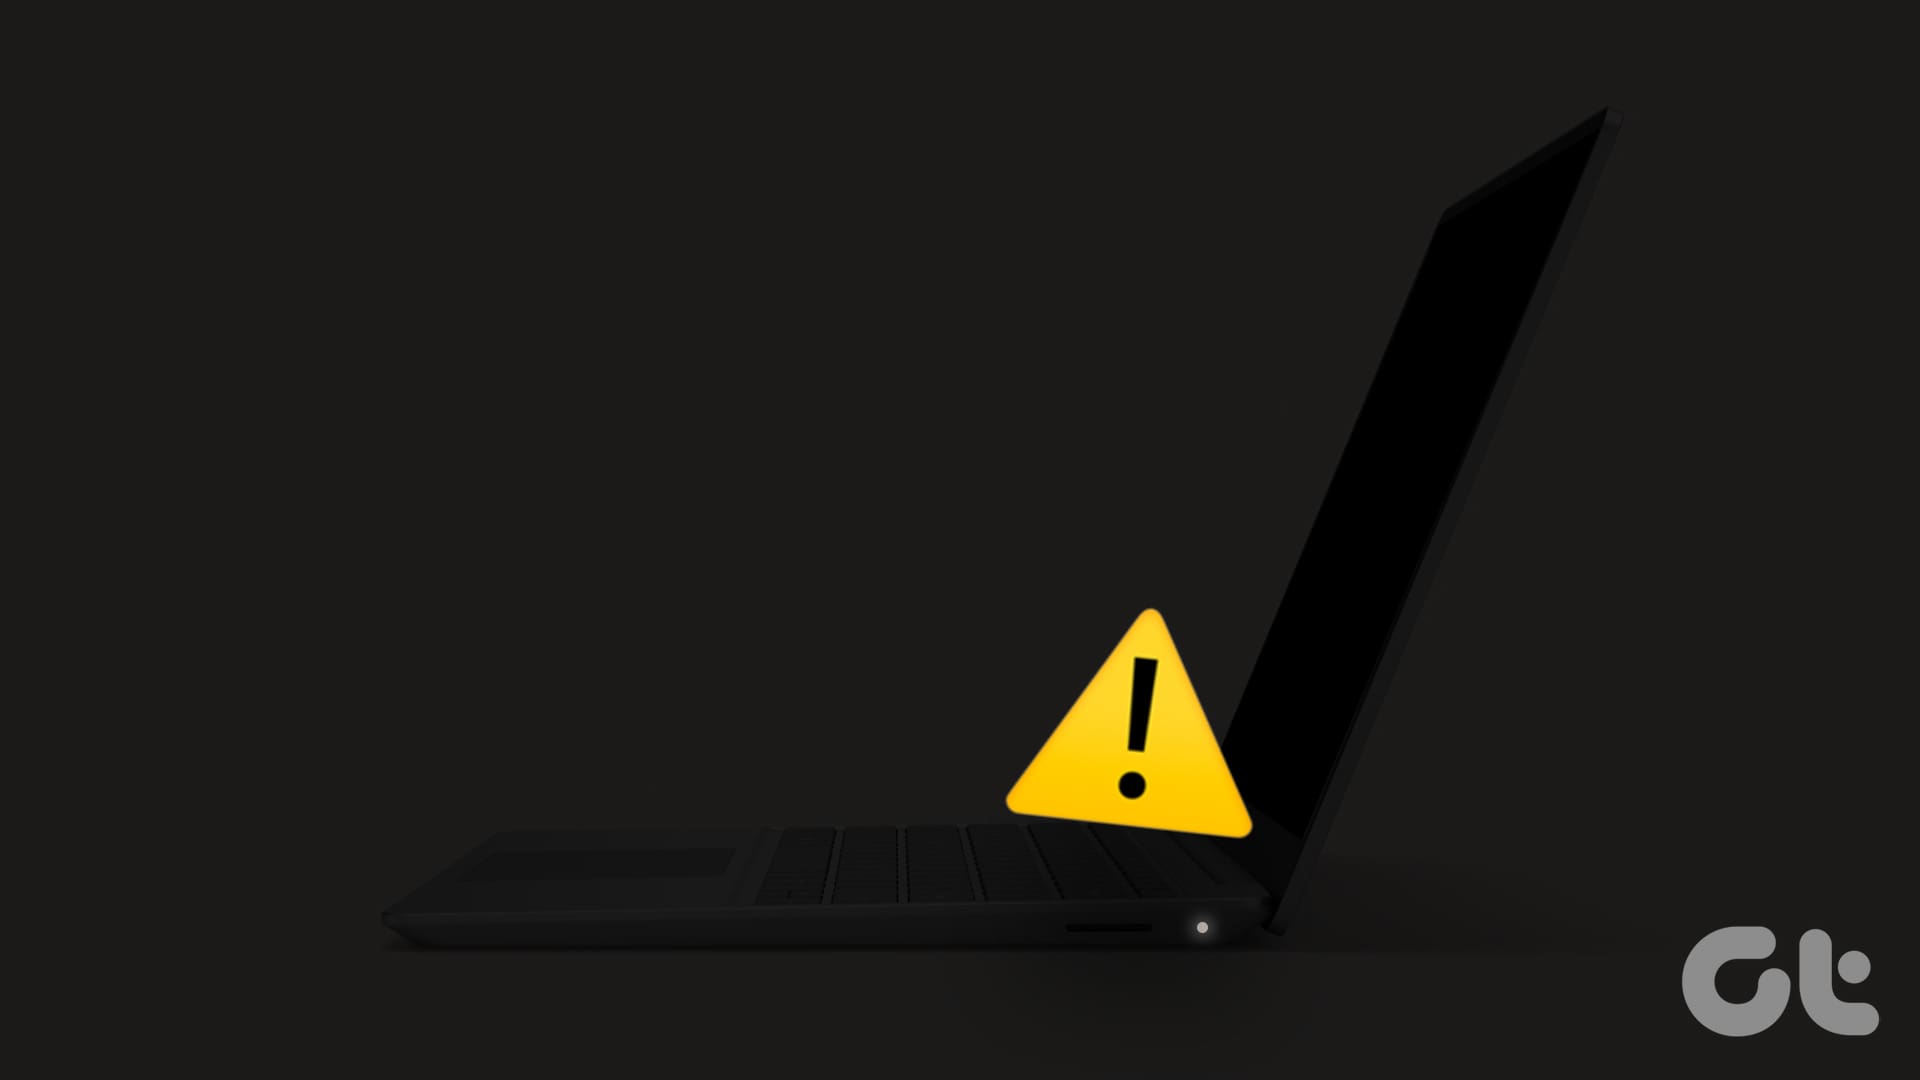 Why Is My Chromebook Screen Glitching: Here's How to Troubleshoot and Fix it